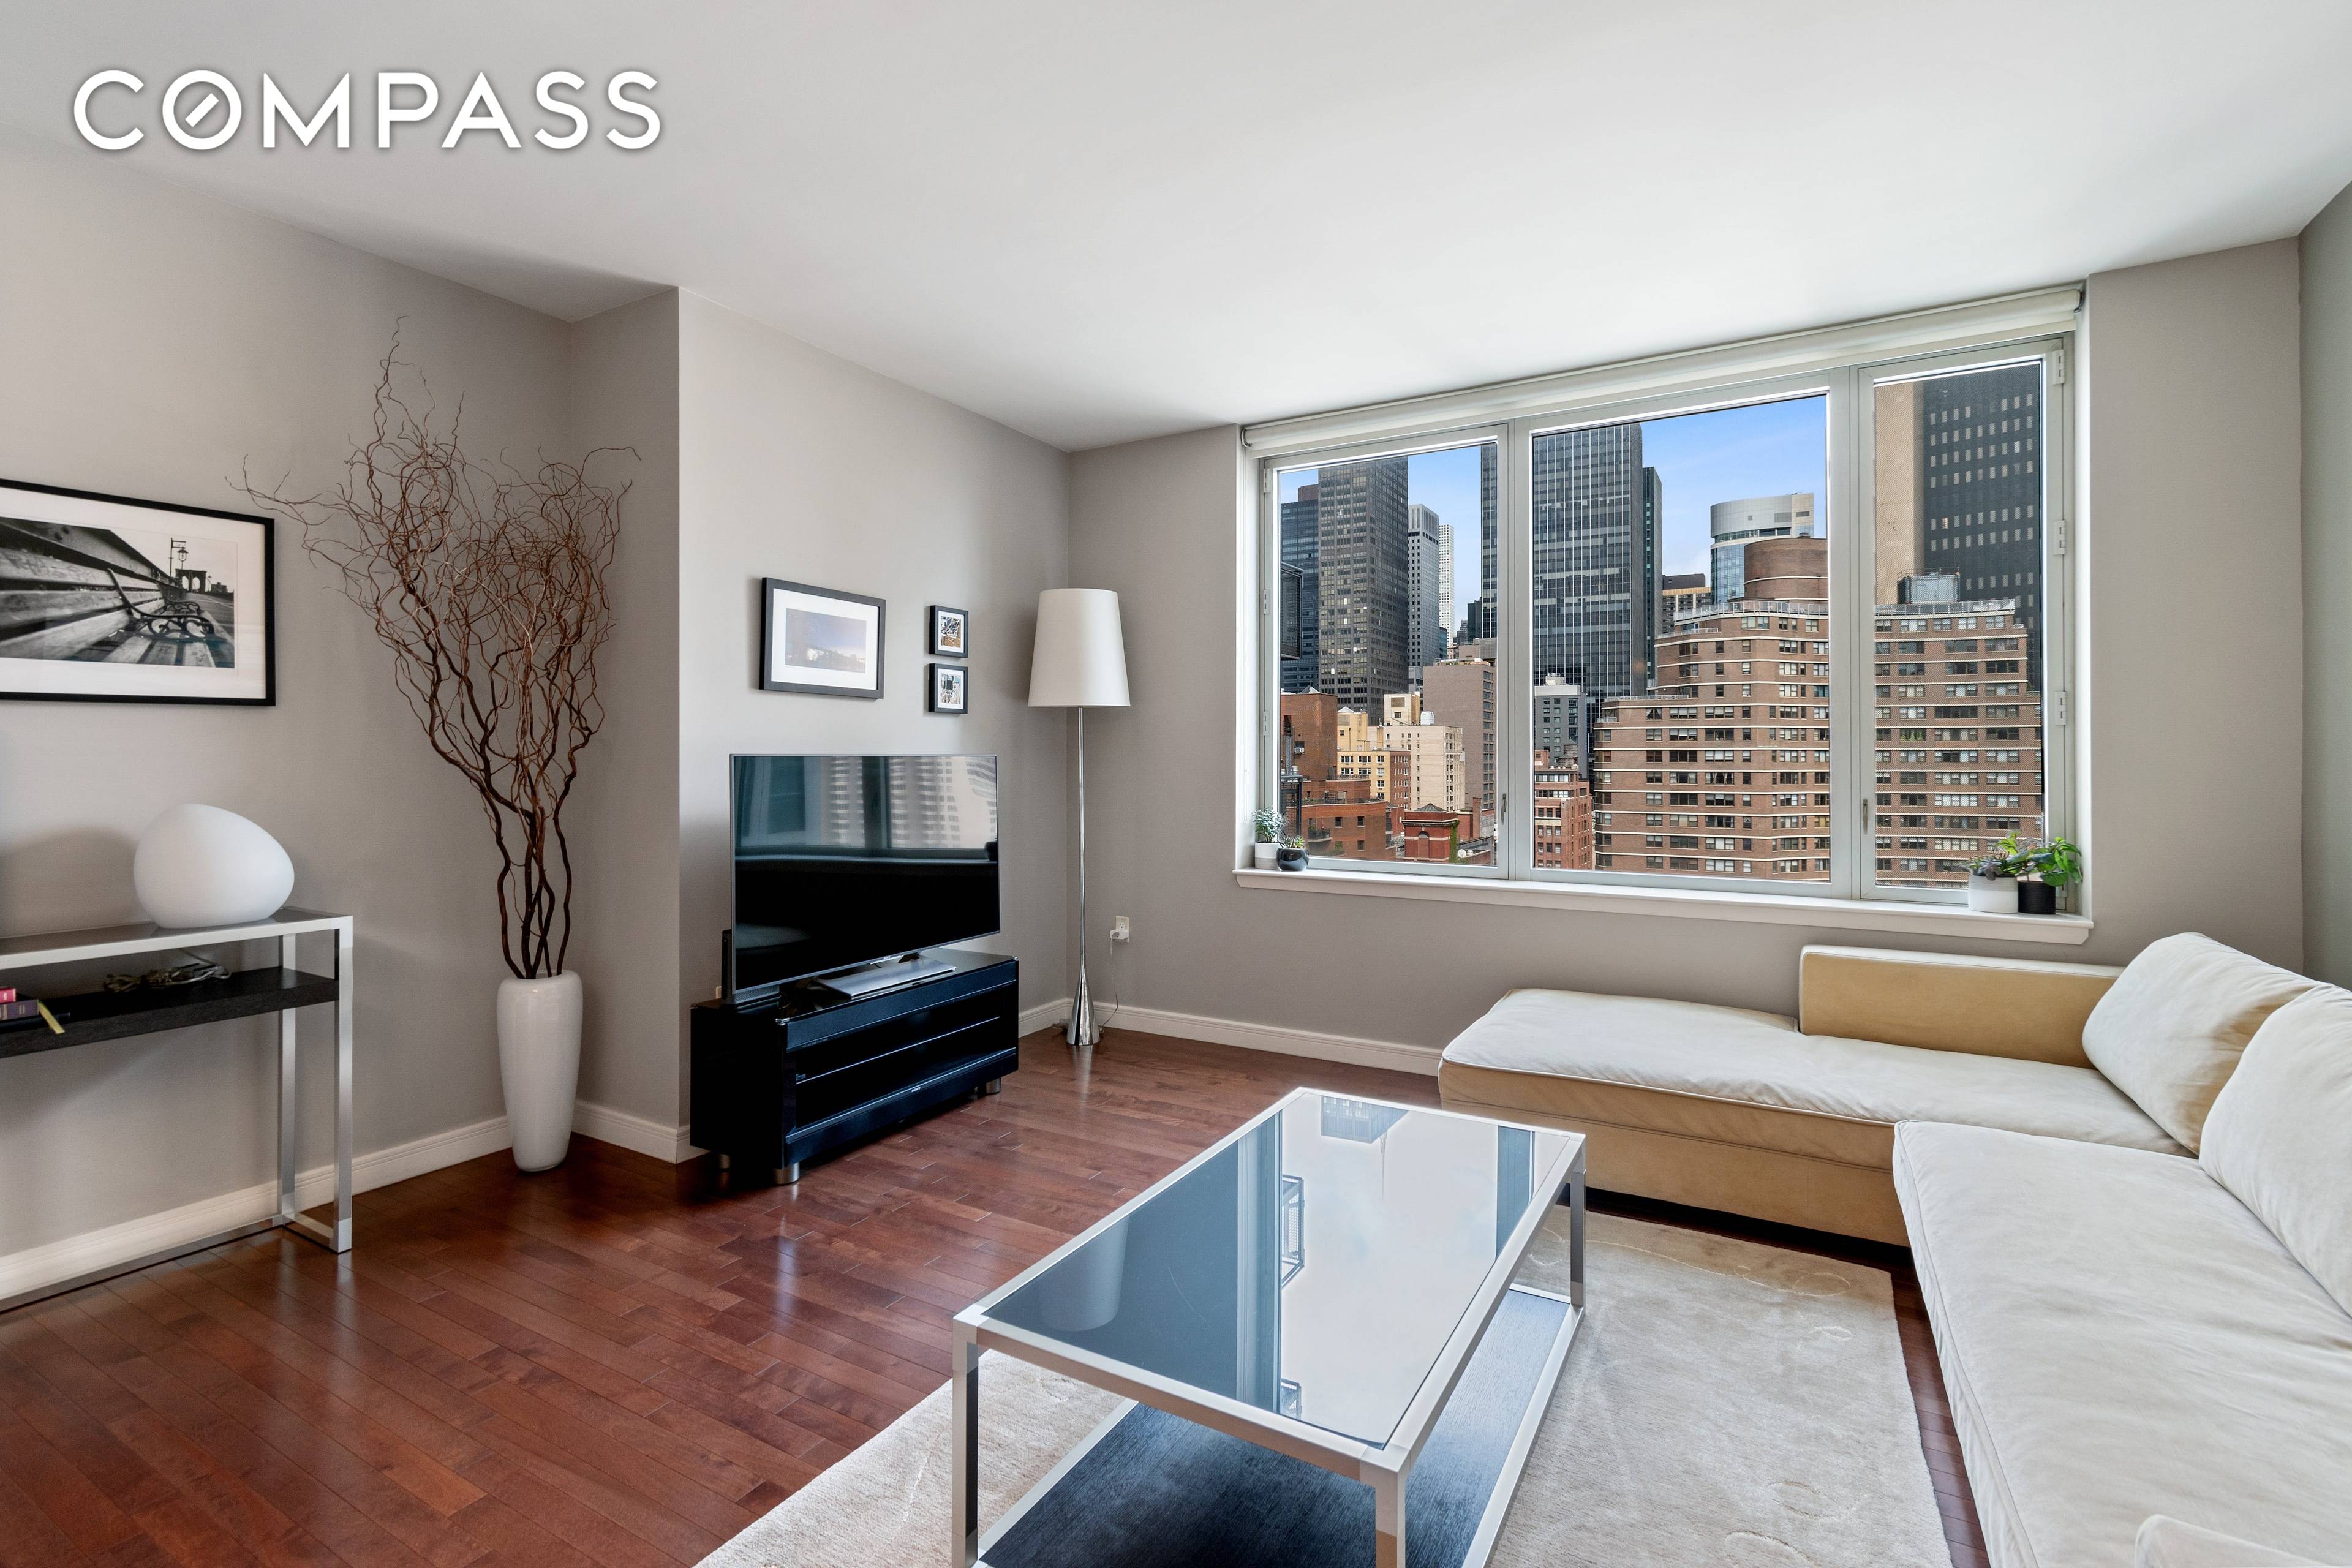 Open skyline views and tons of sunlight shine through the oversized windows of this extra large one bedroom.